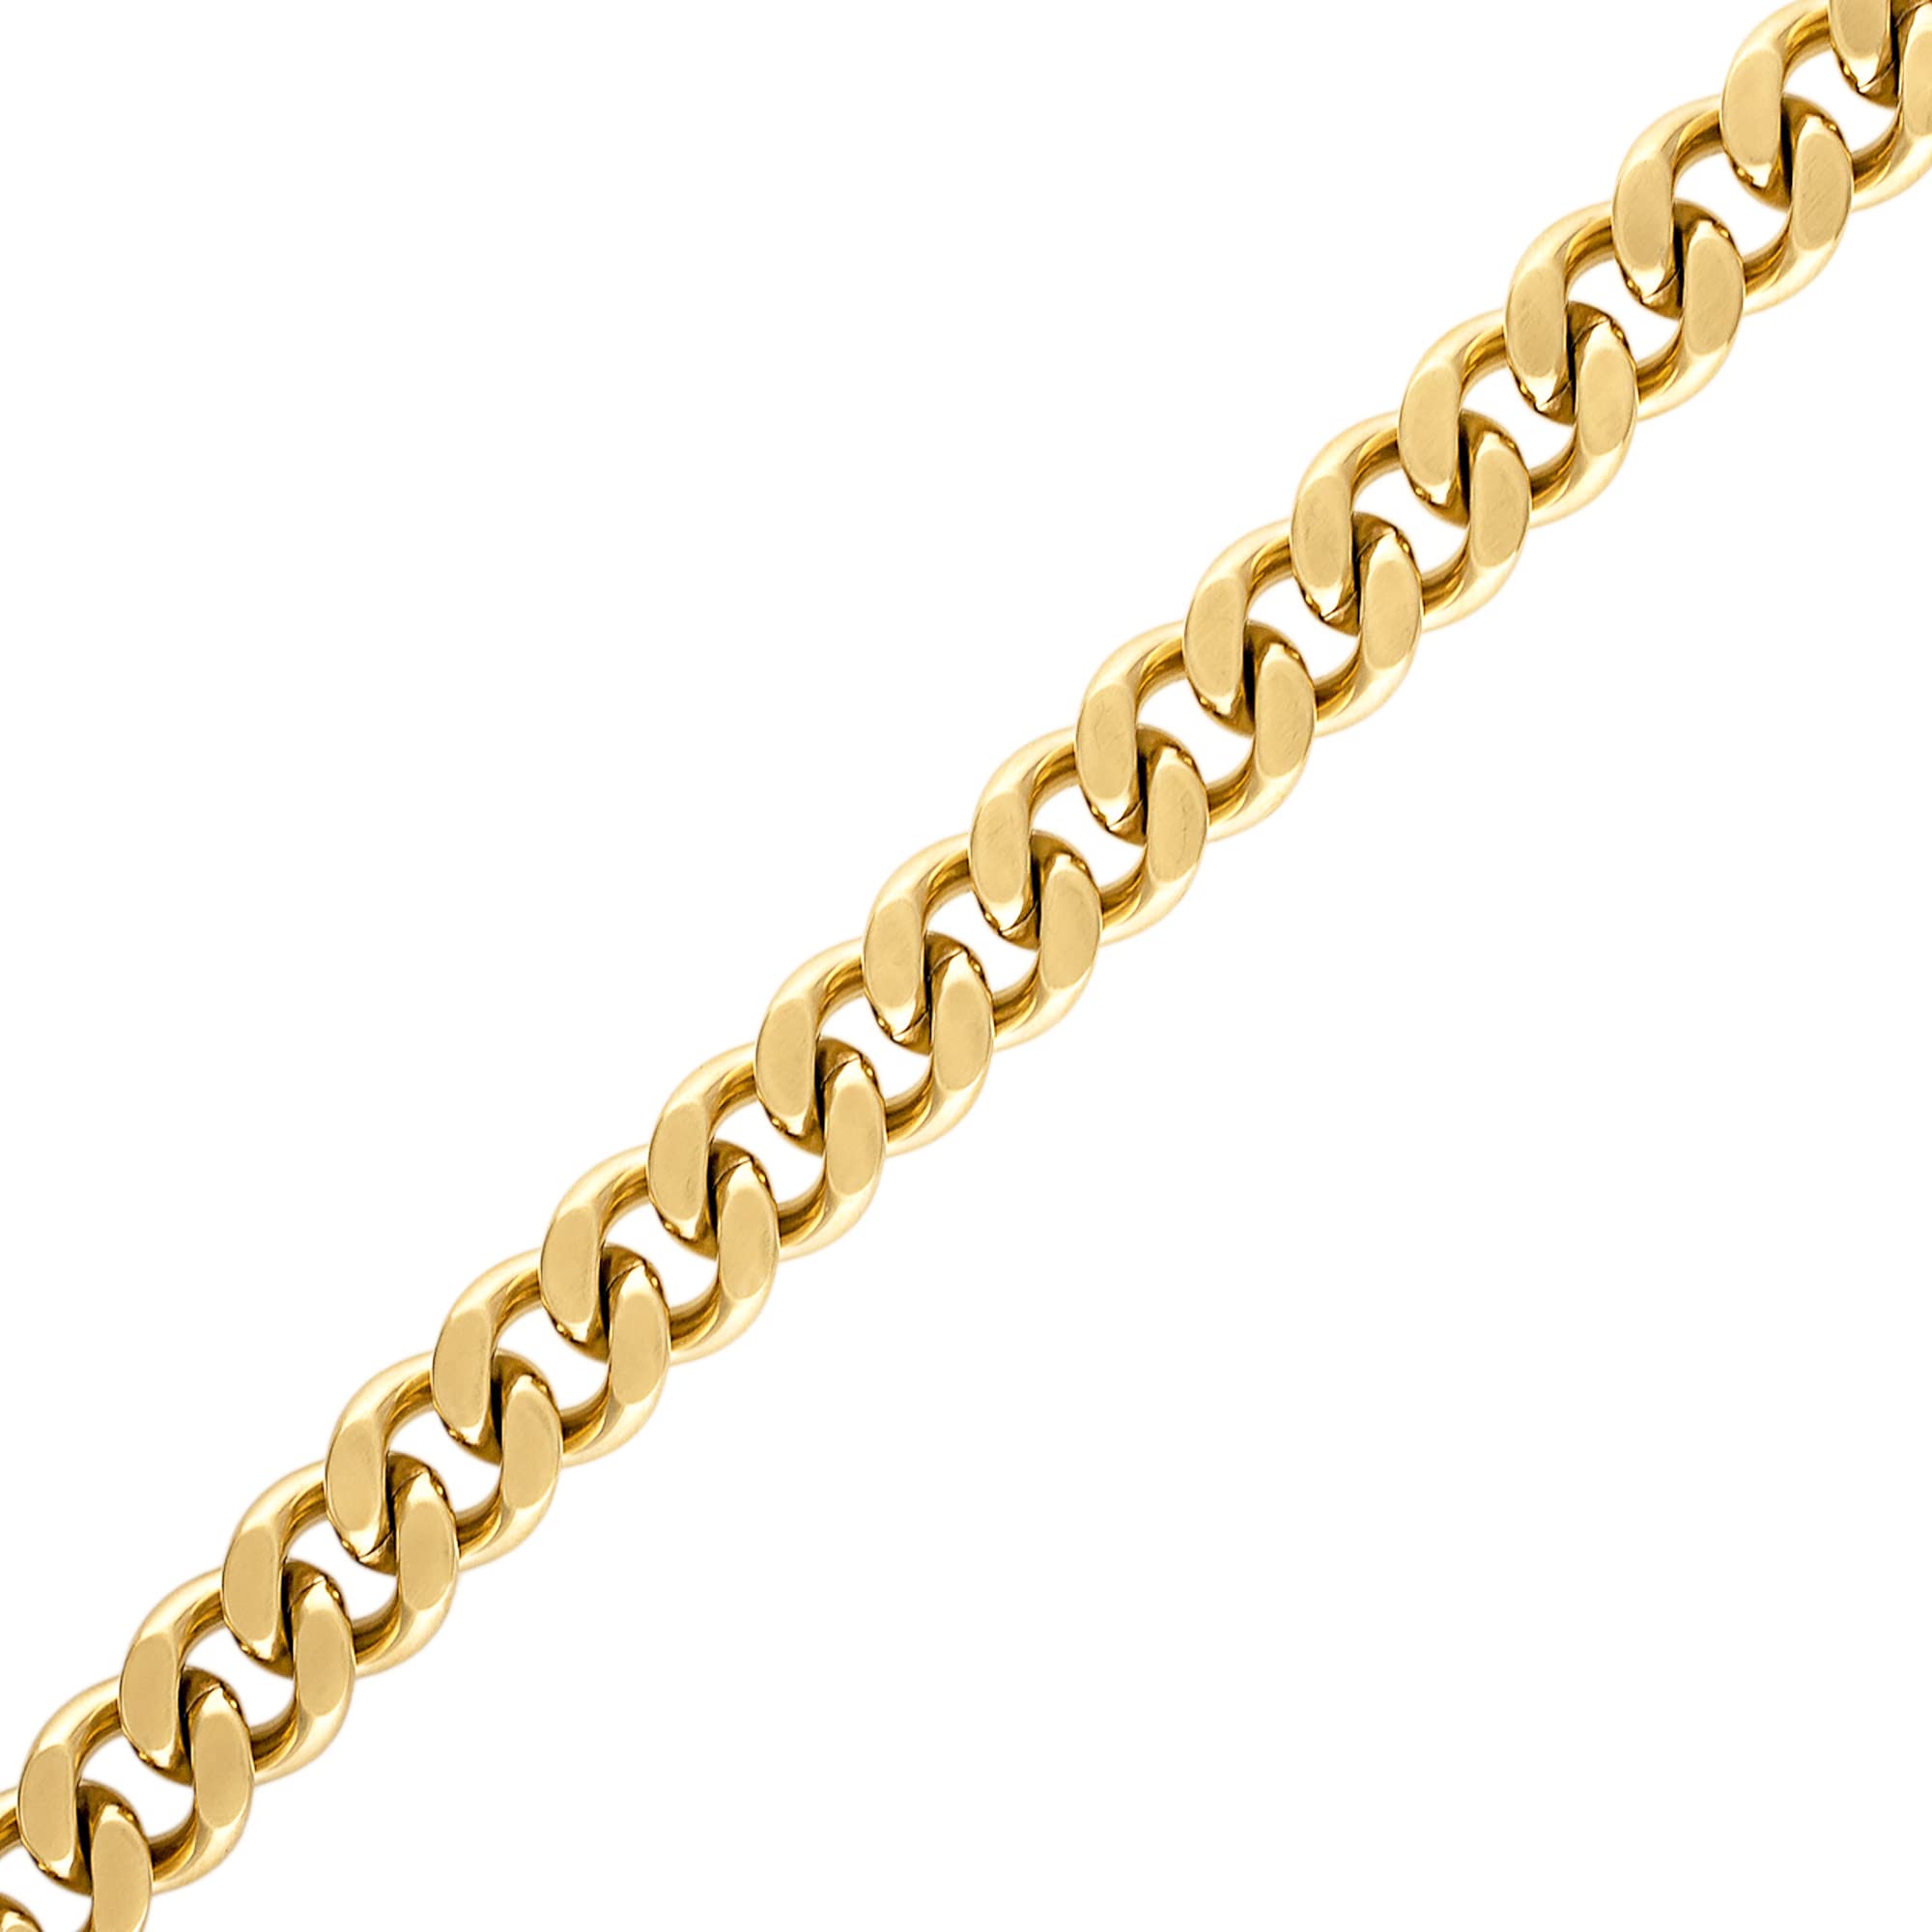 Bulova Men's Jewelry Classic Gold Tone Stainless Steel Curb Chain Necklace, 10mm, Length 24